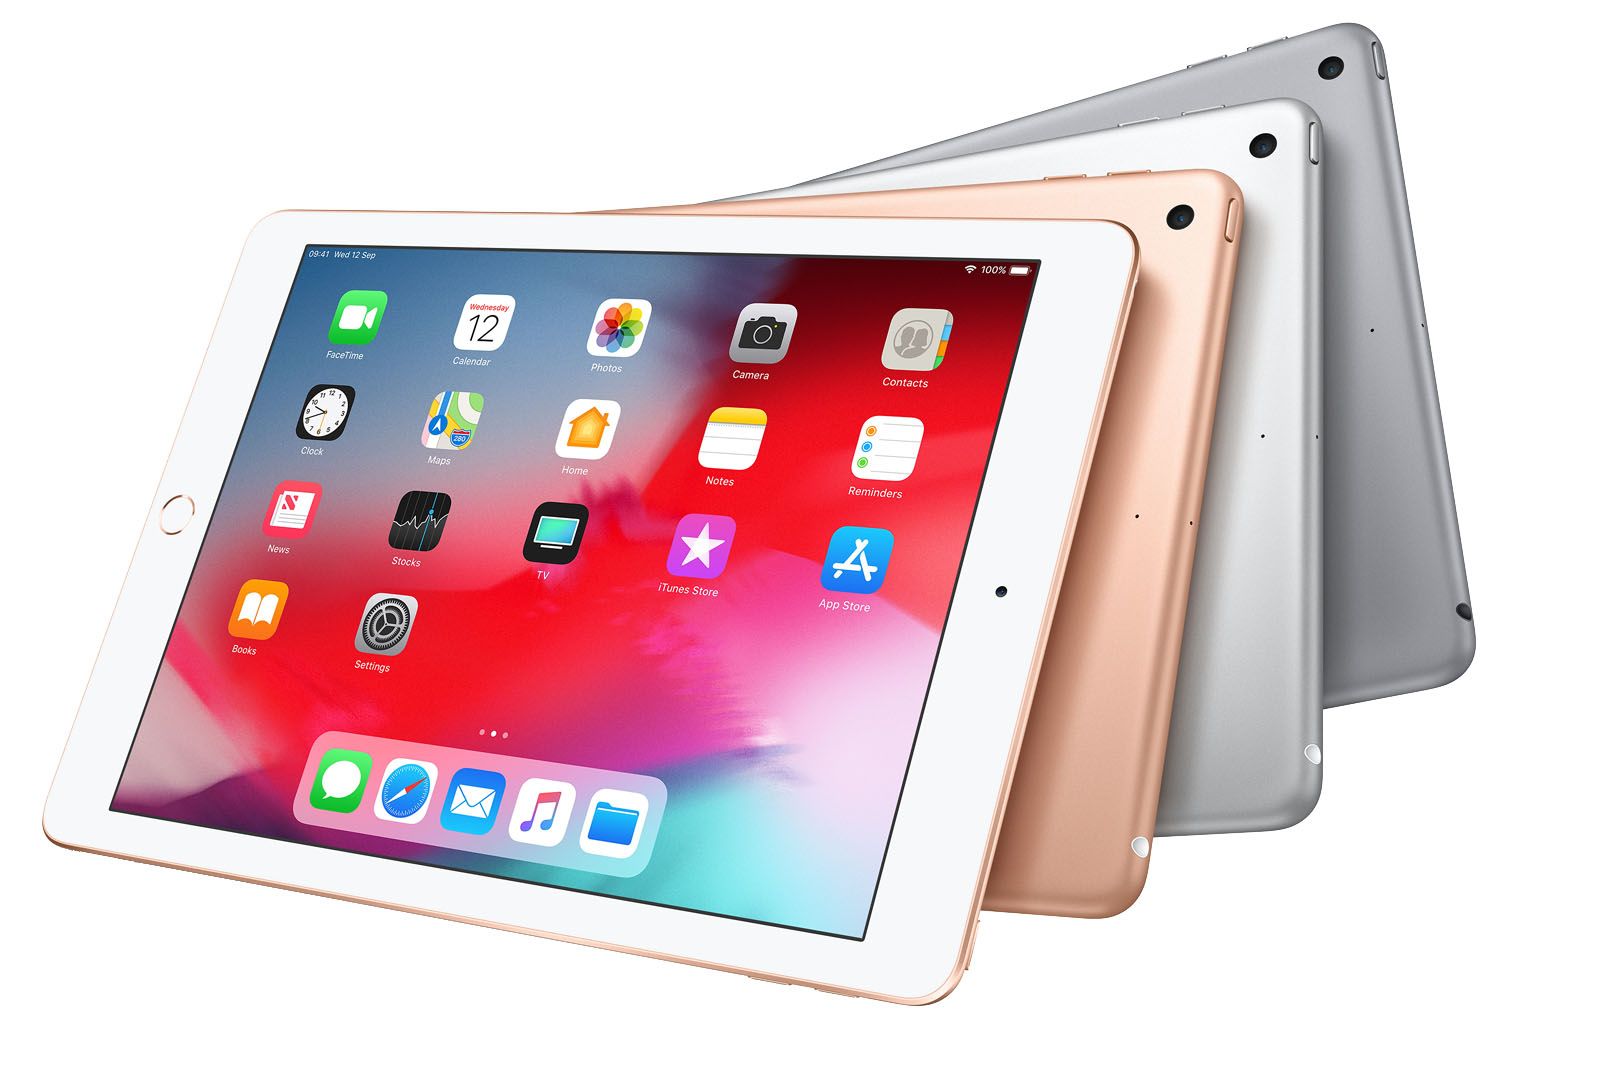 New iPads expected in late 2020 - maybe an iPad Air upgrade image 1